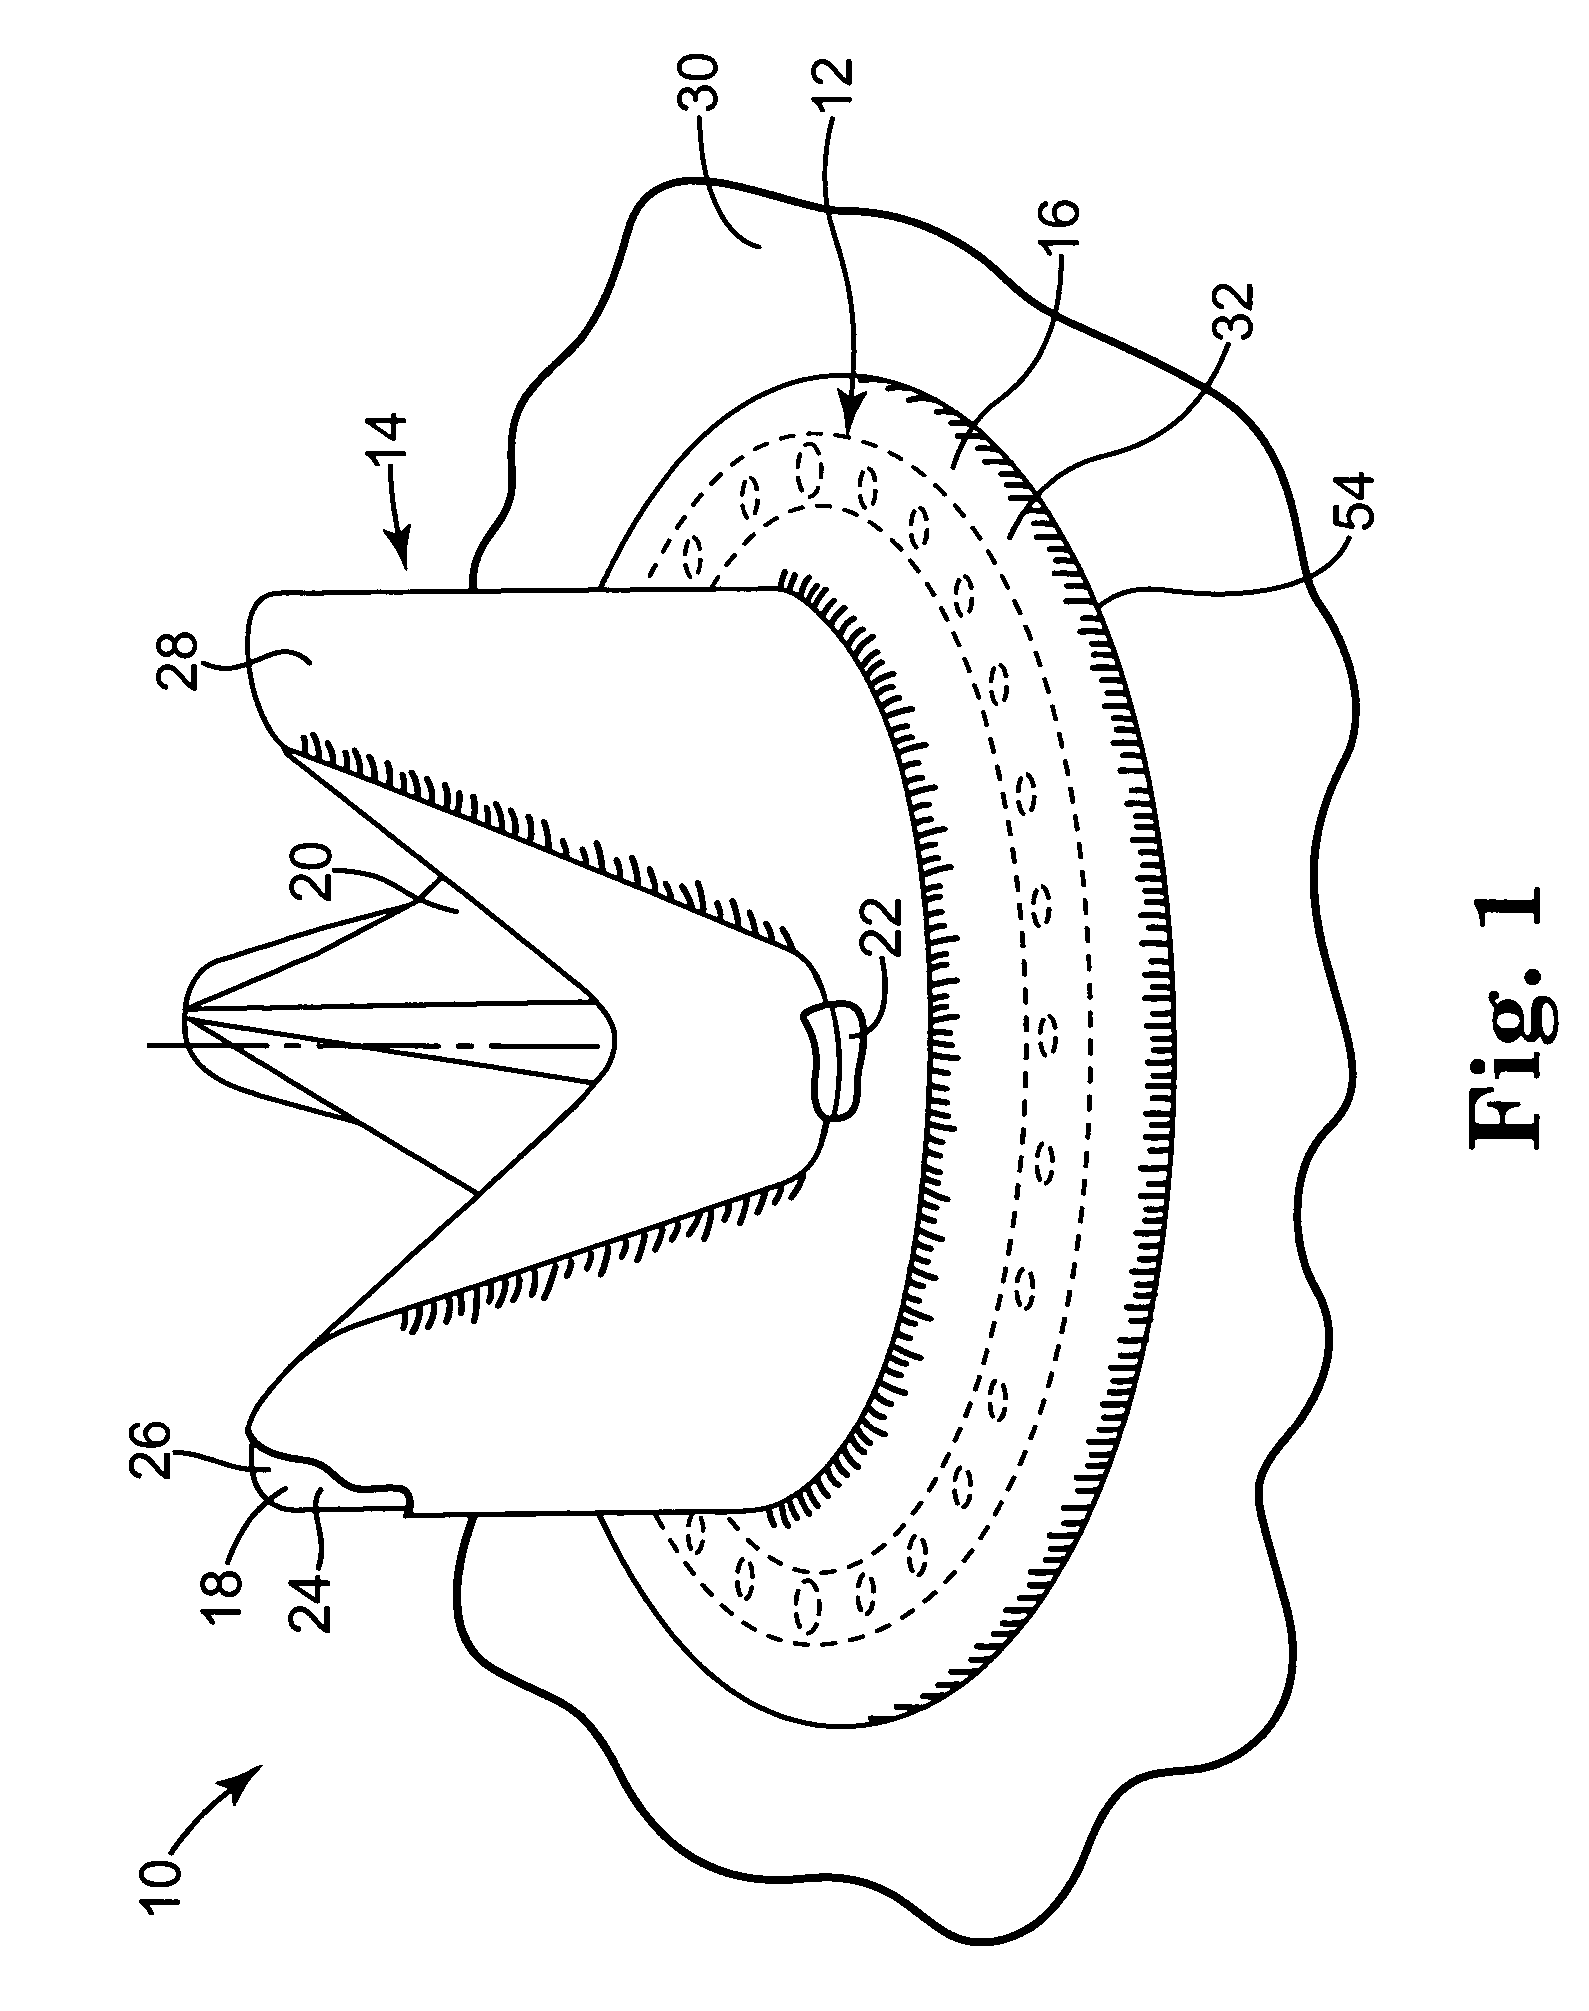 Pharmacological delivery implement for use with cardiac repair devices